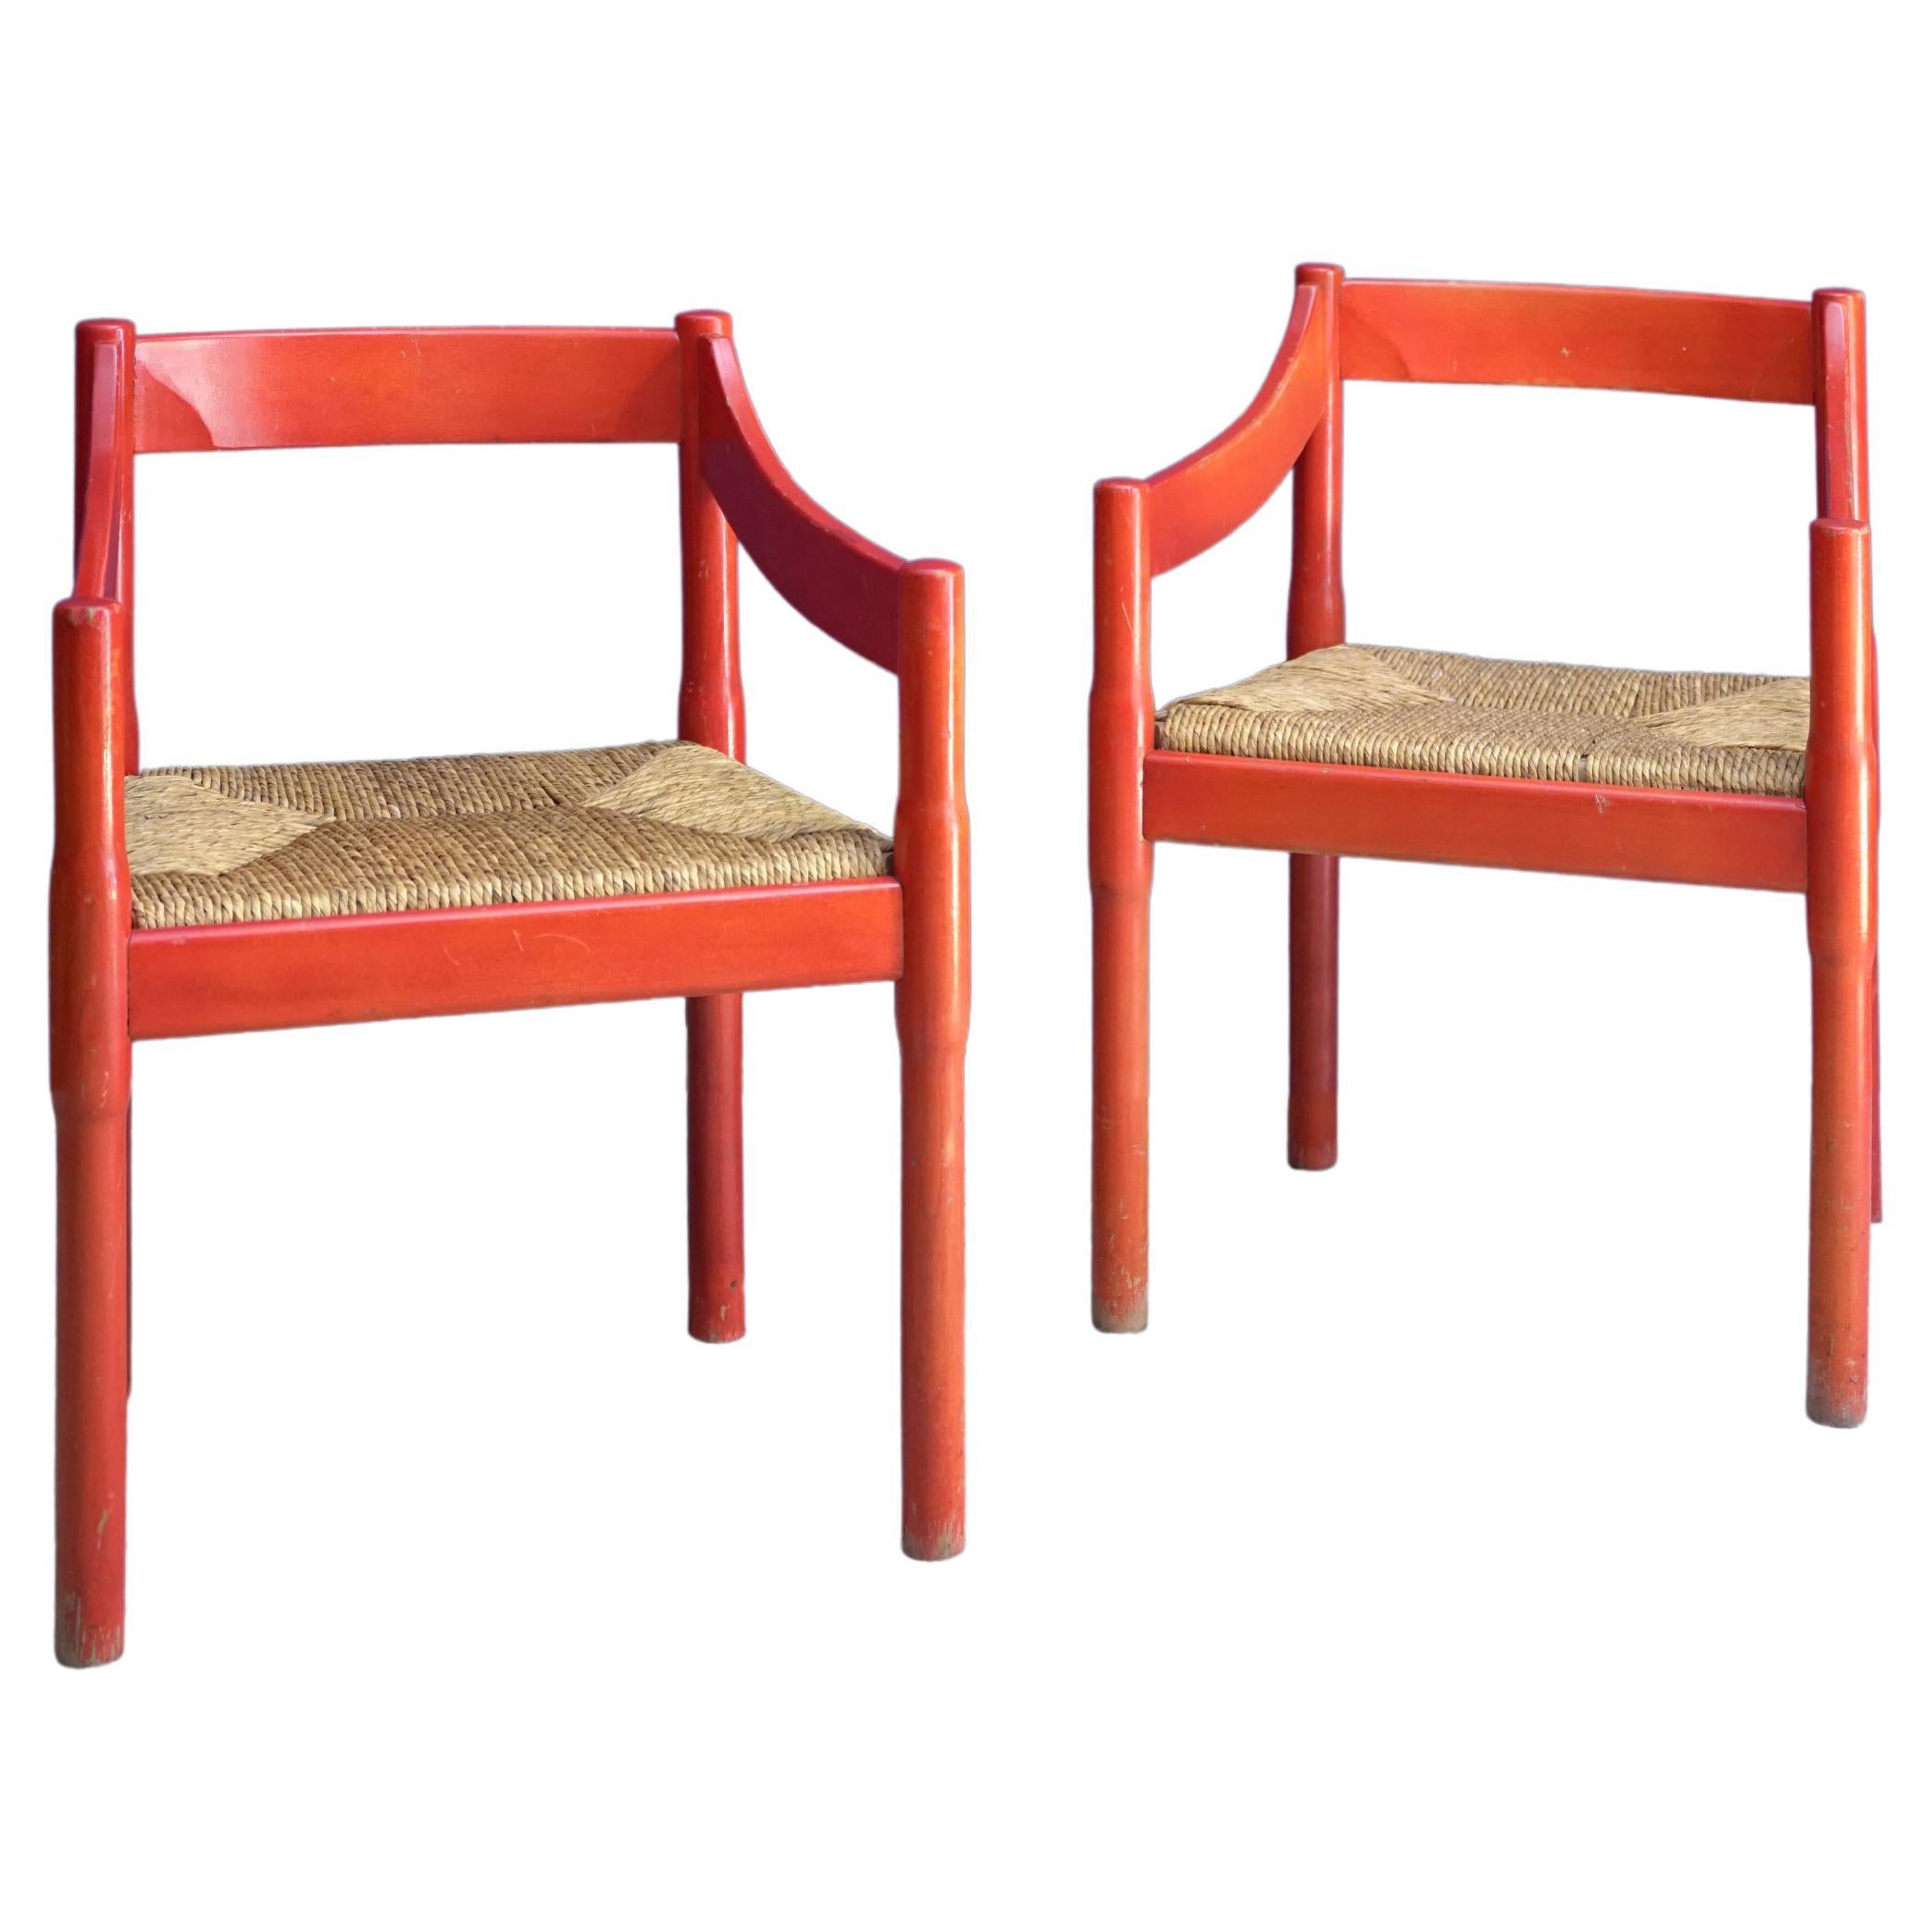 Pair of Original Red Carimate Armchairs by Vico Magistretti